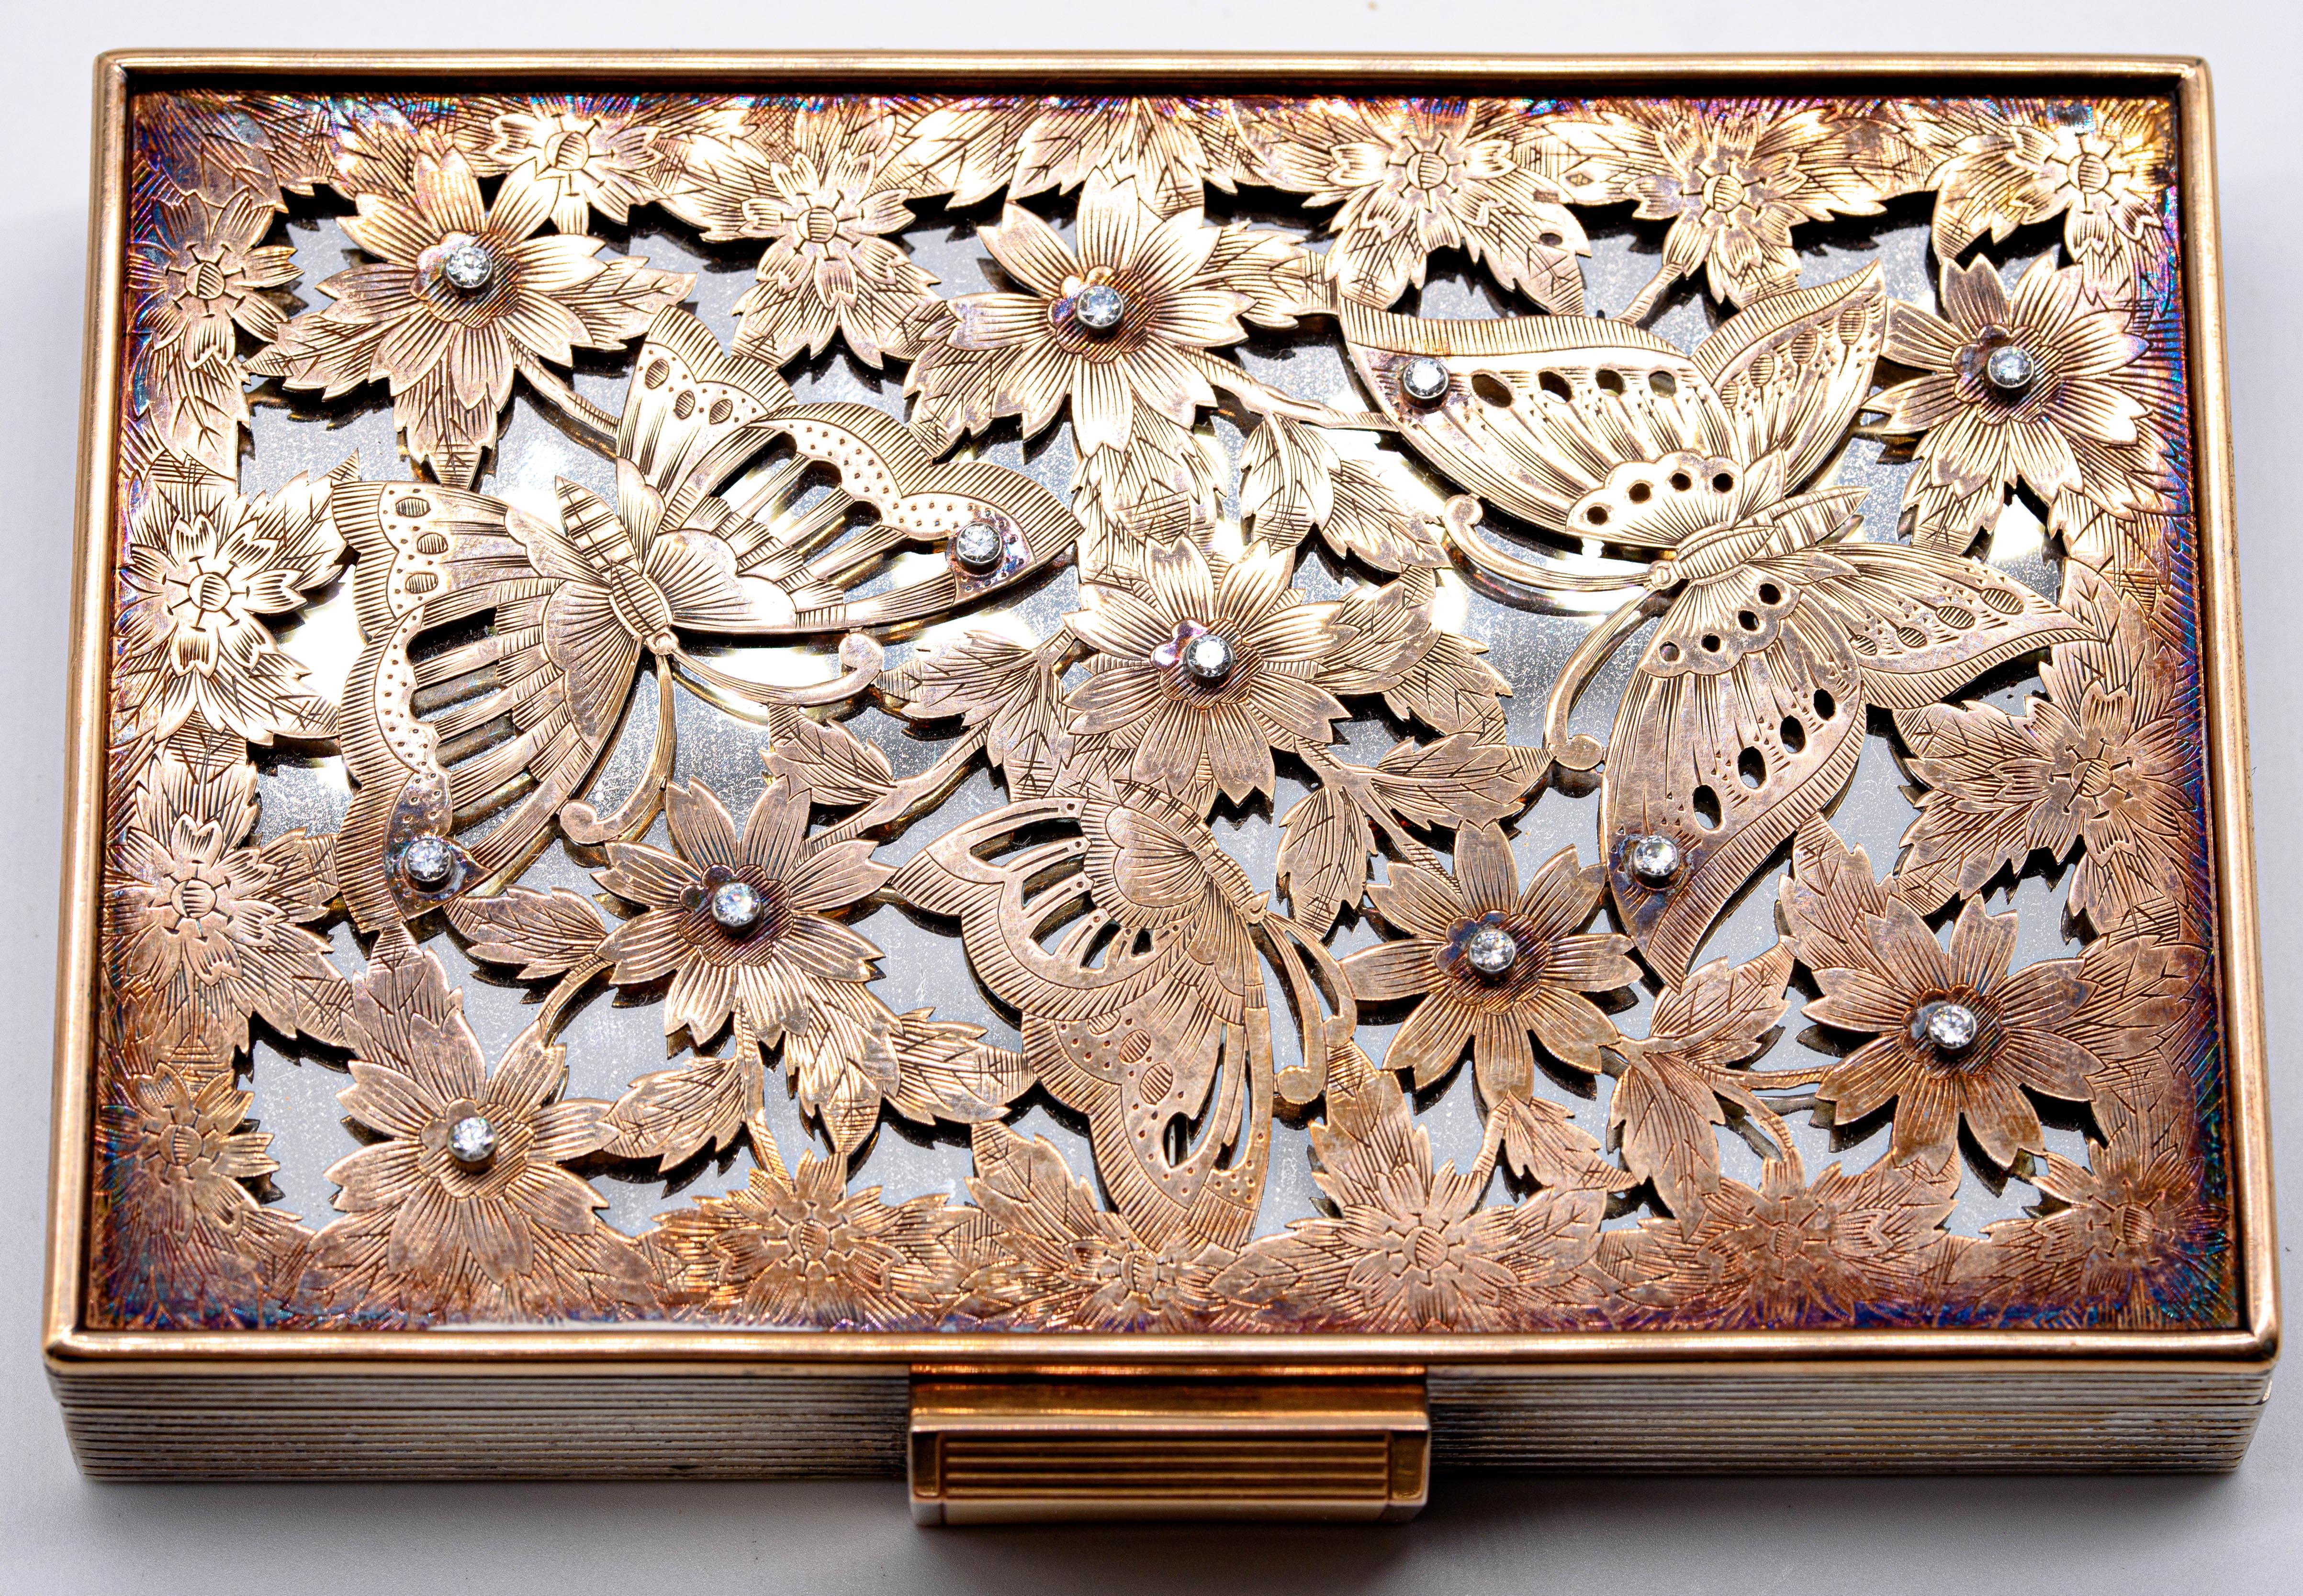  An elegant and amusing little minaudière recalling the elegance and fashion of the 1930's.  Diamond sprinkled butterflies on the cover open at the hinge to reveal numerous compartments: a perfume dispenser, lipstick, a comb receptacle, a square